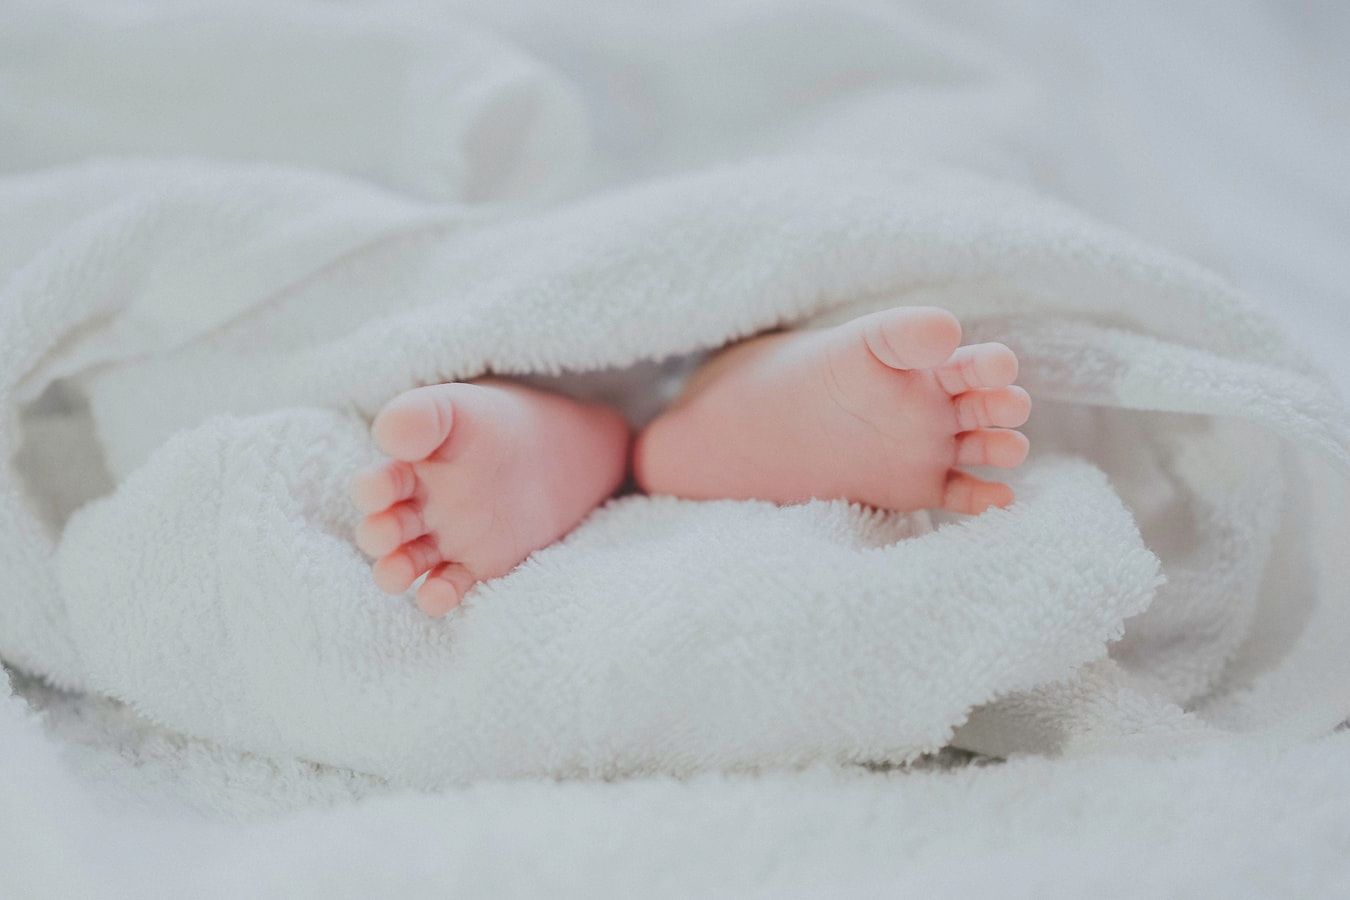 Newborn found abandoned in cardboard box with ‘please help me’ note